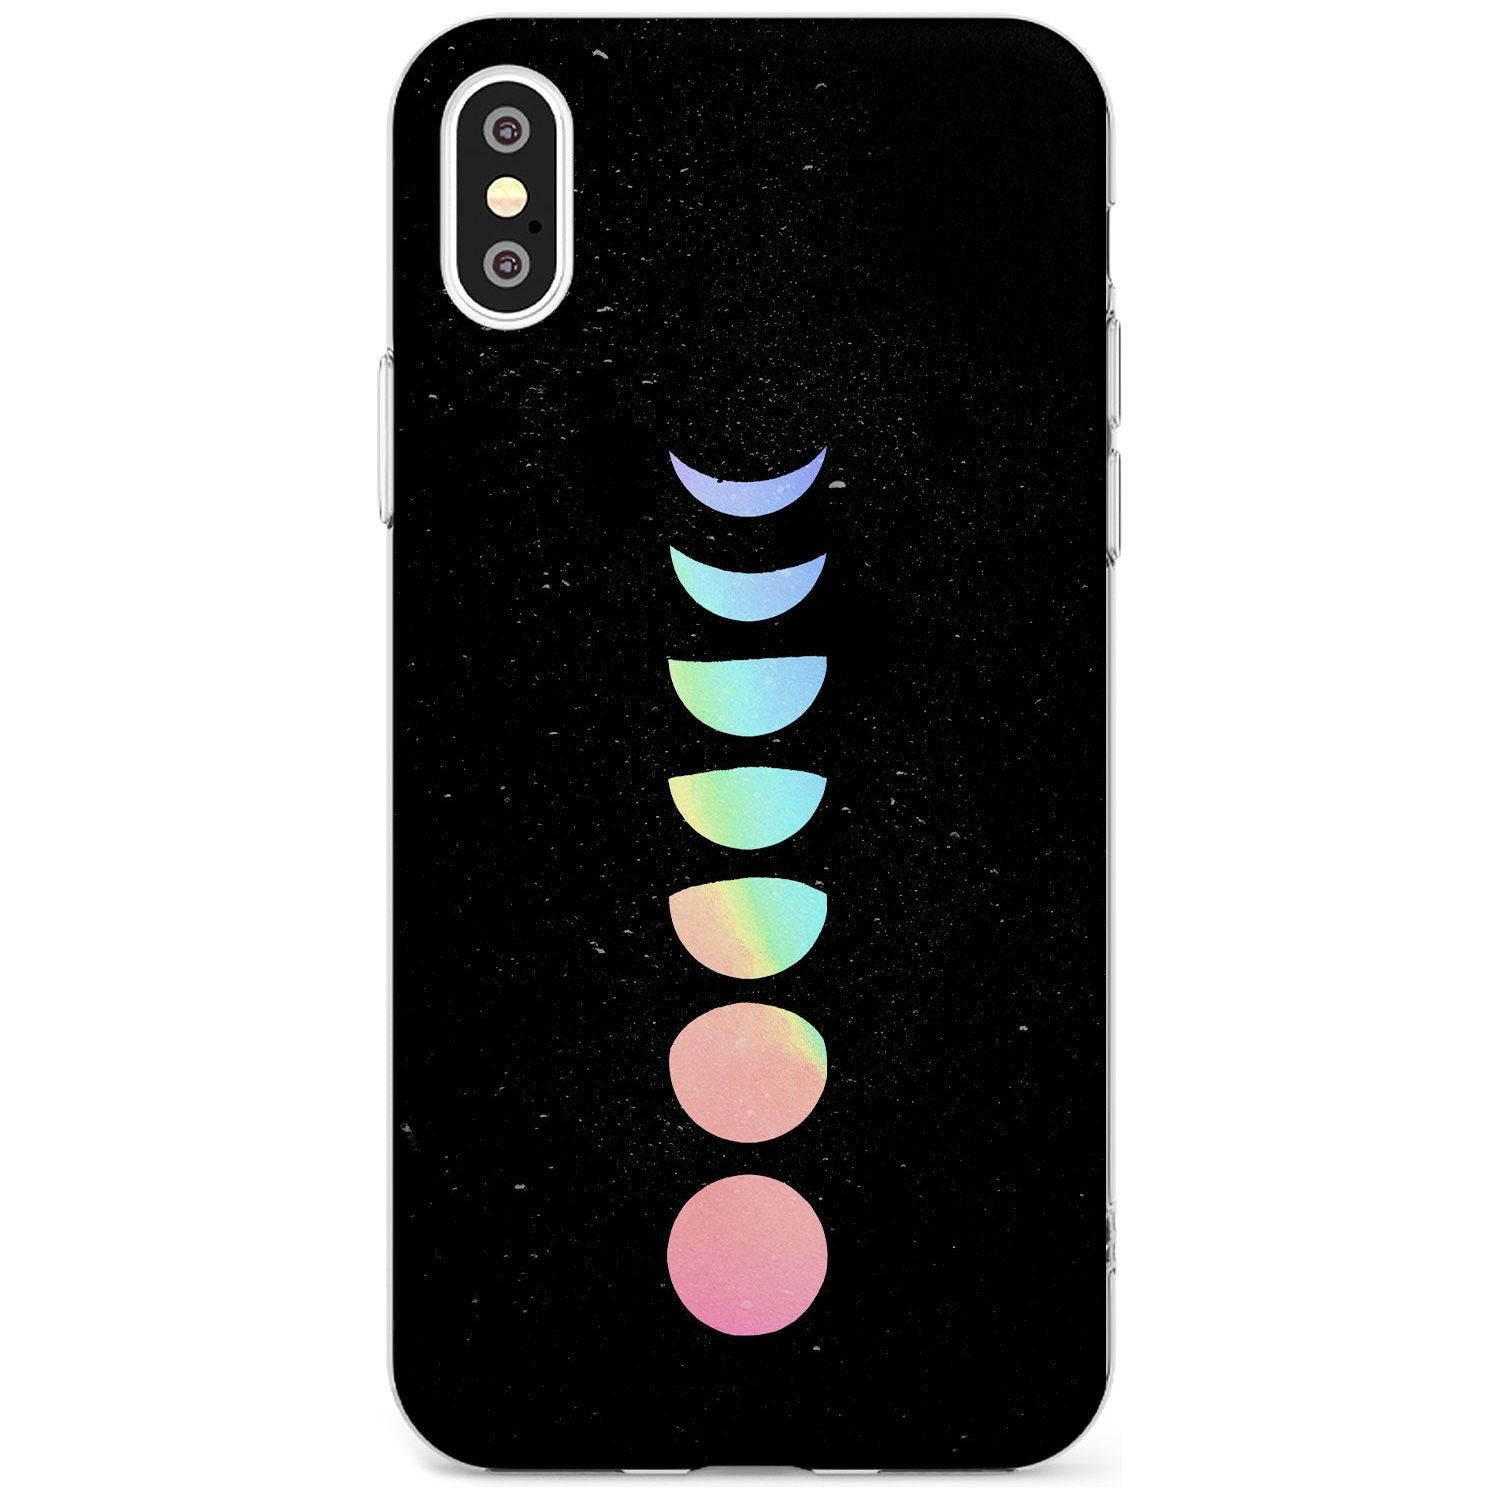 Pastel Moon Phases Black Impact Phone Case for iPhone X XS Max XR